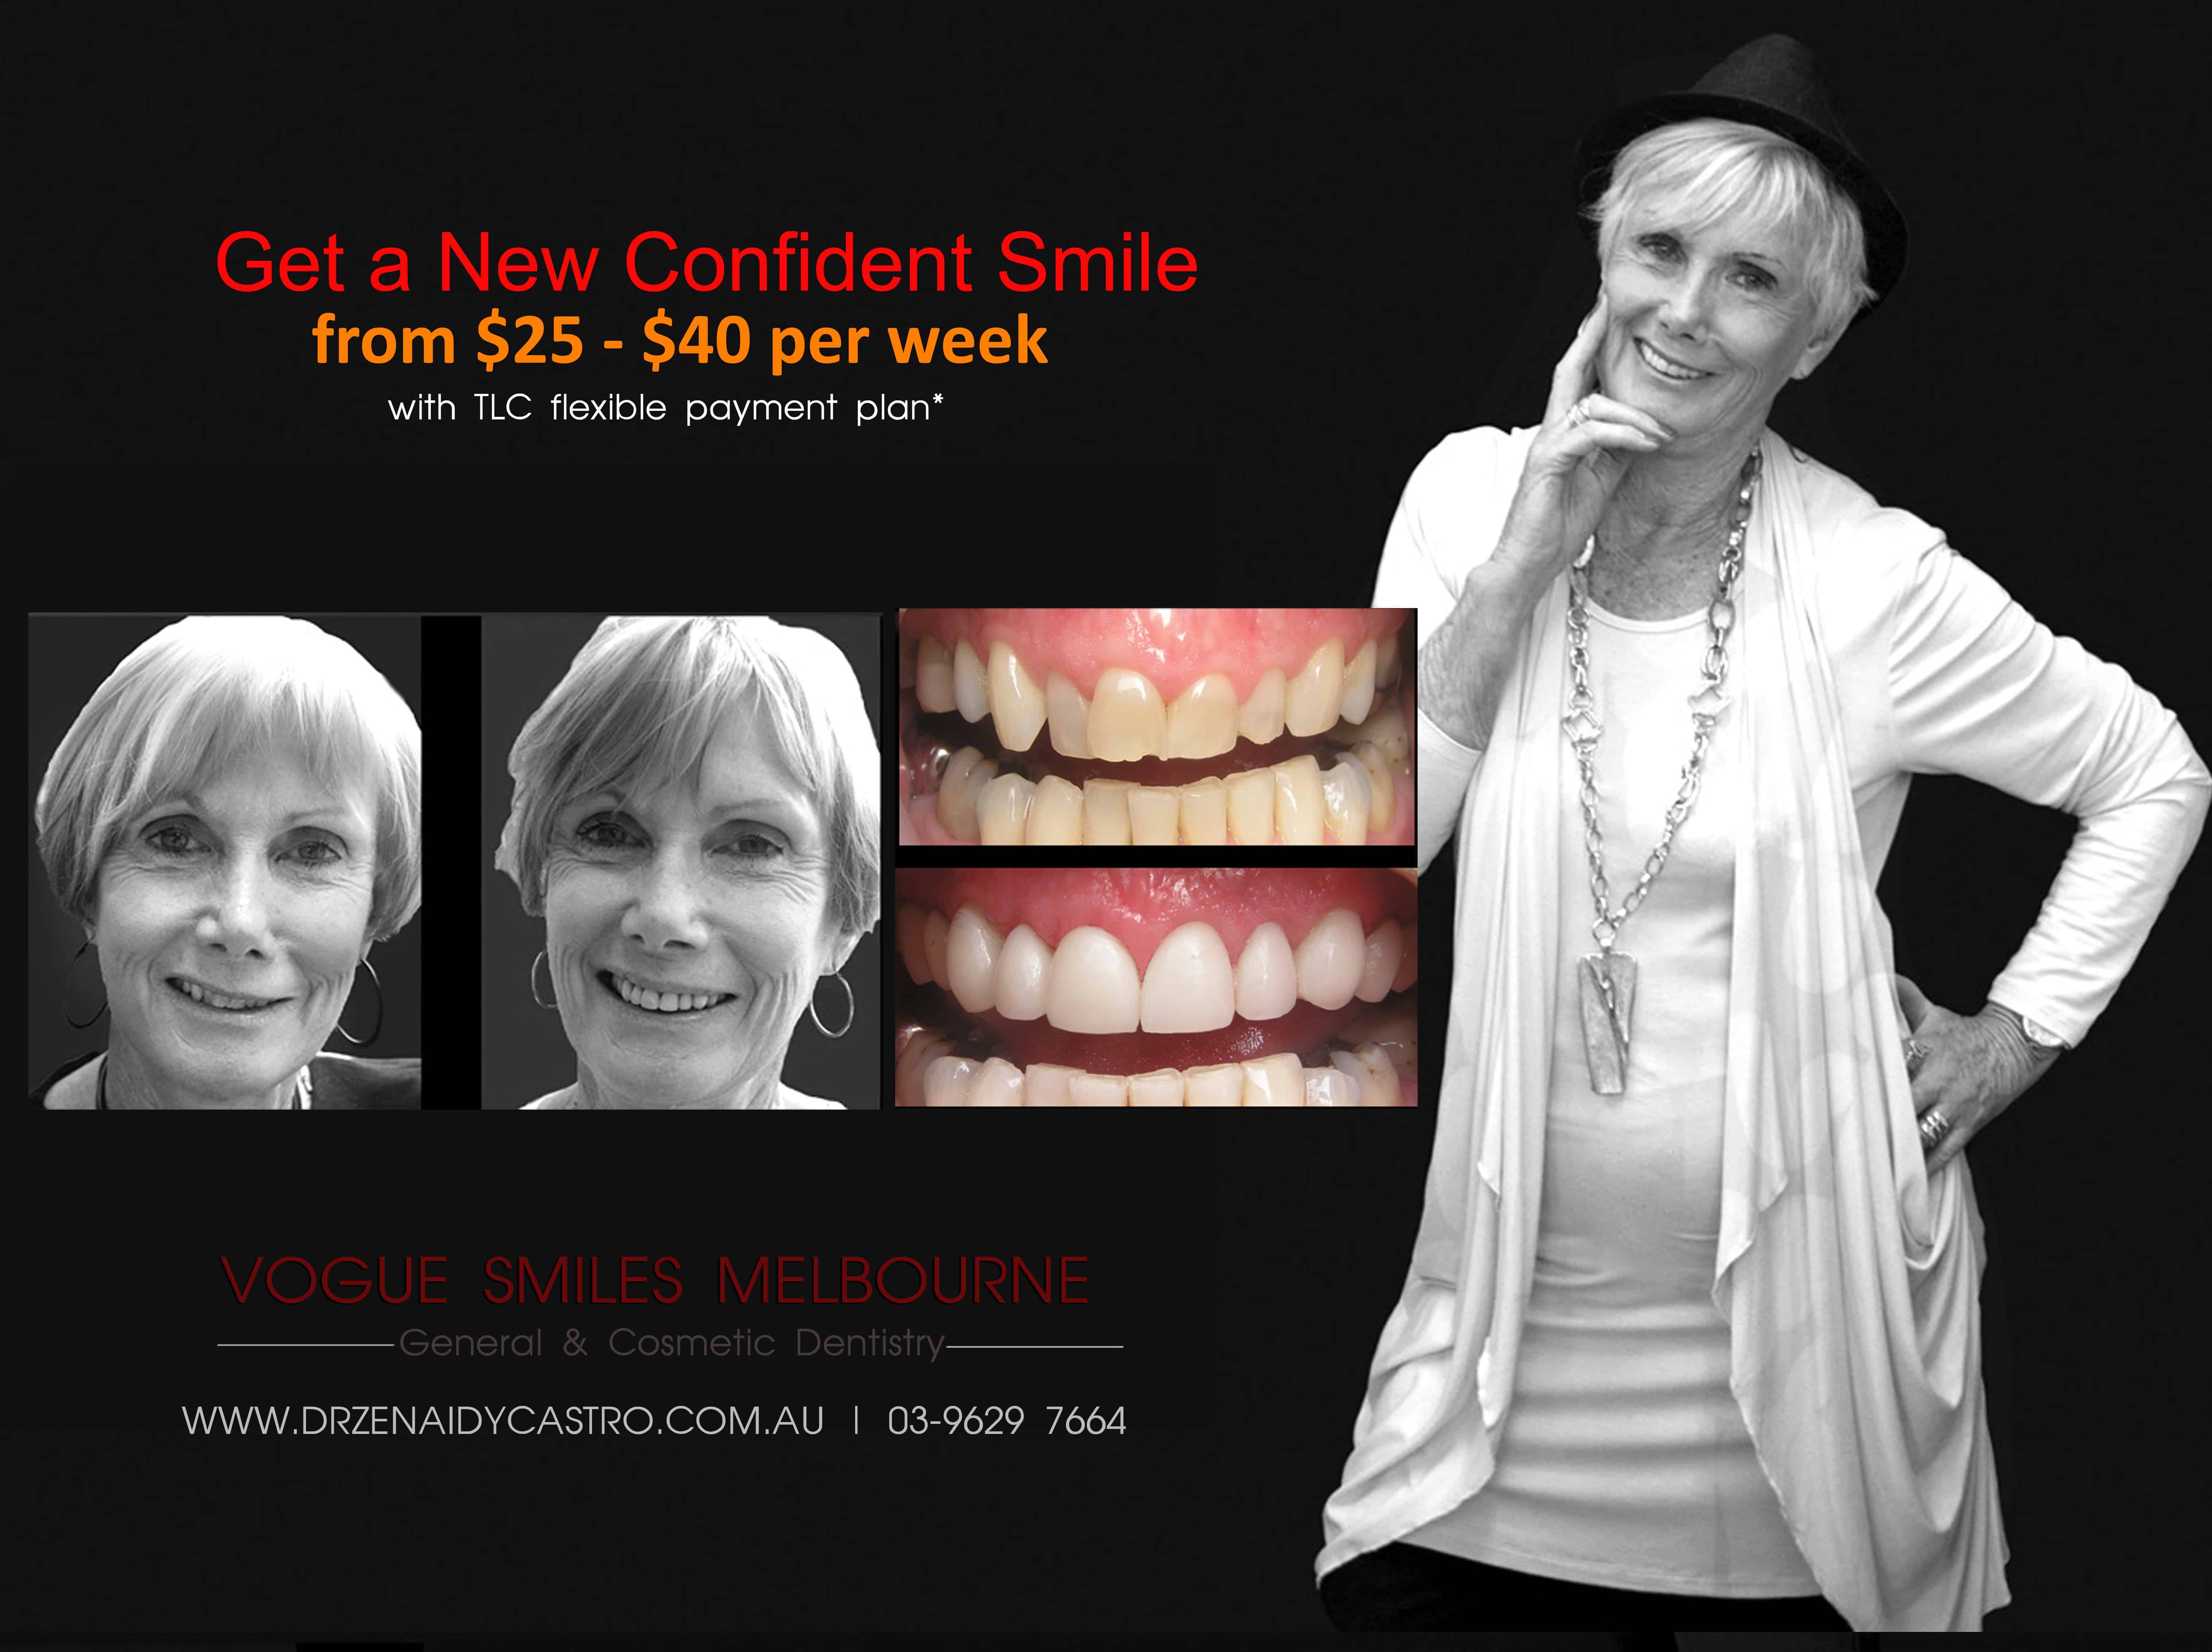 Anti-aging Dental Treatments Melbourne by best cosmetic dentist in Melbourne